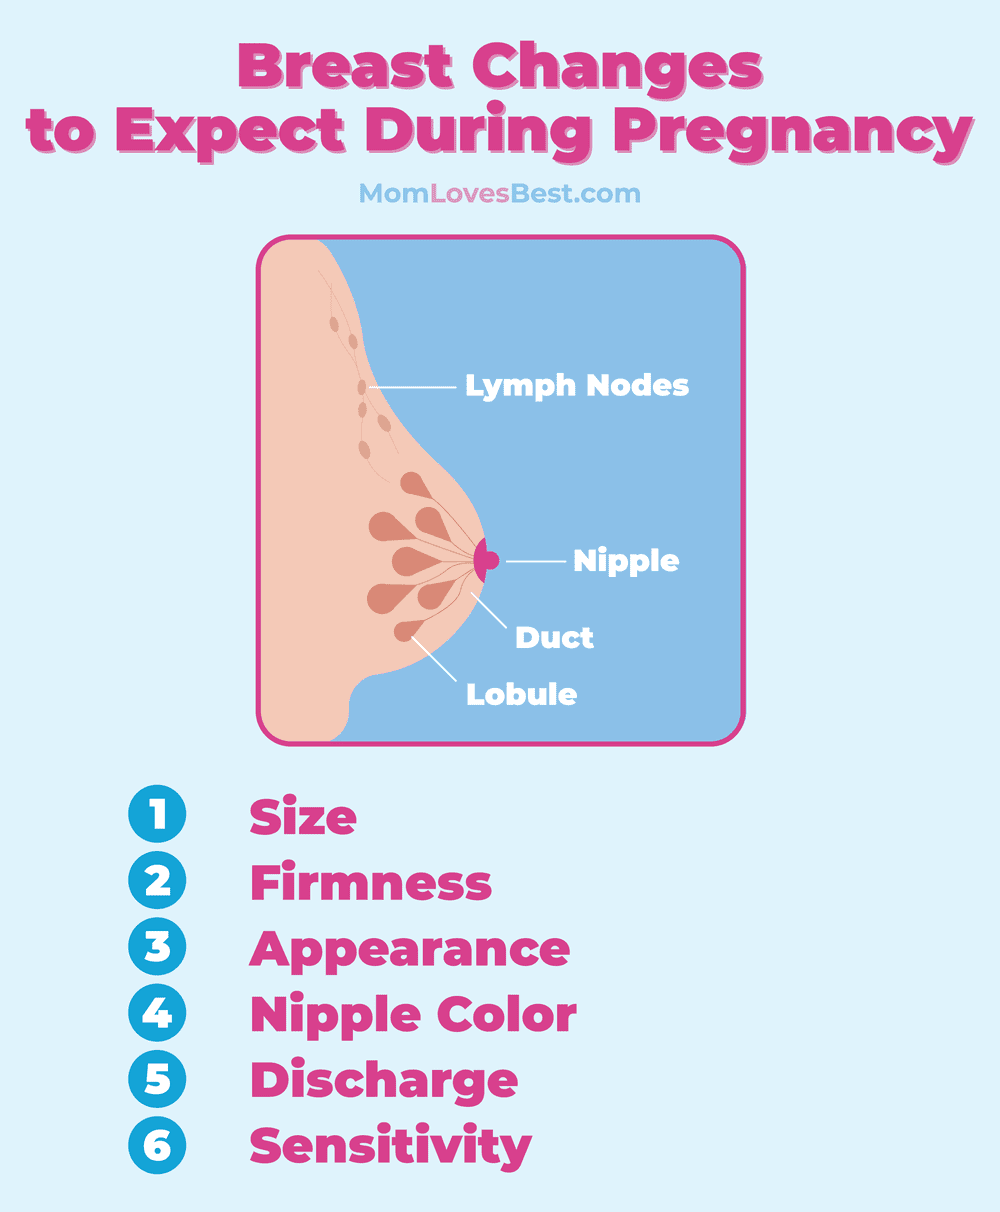 8 Common Breast Changes During Pregnancy